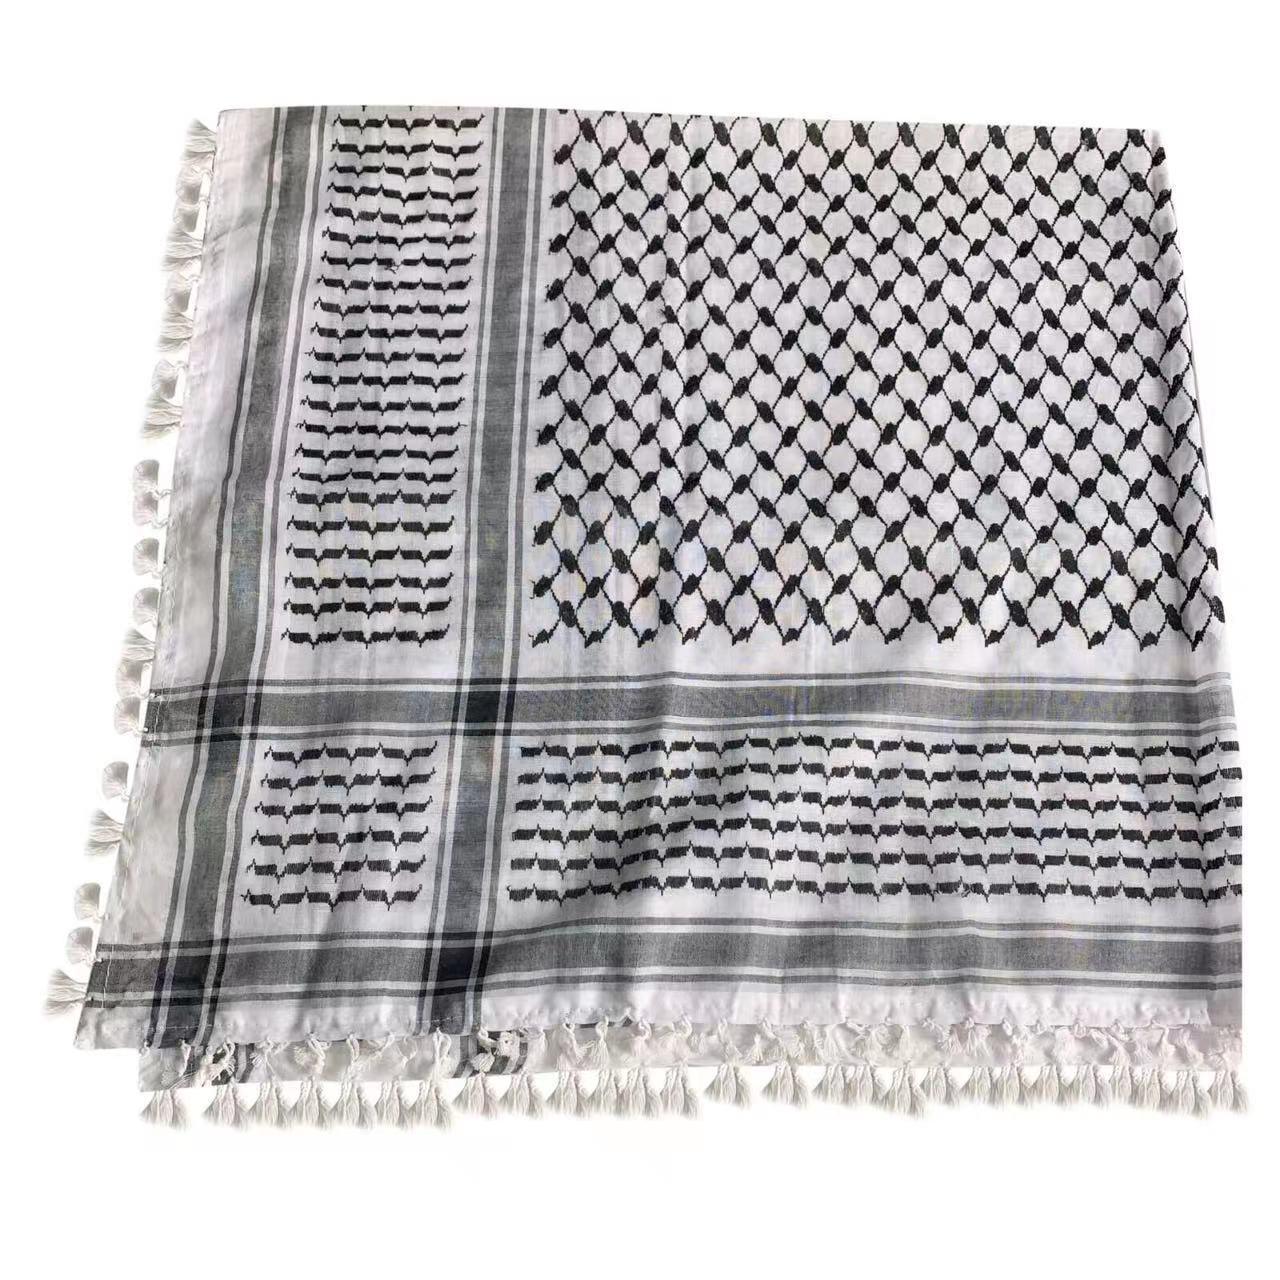 MH052 Four-Sided Fringed Kuffiyeh Square Hijab - Mariam's Collection